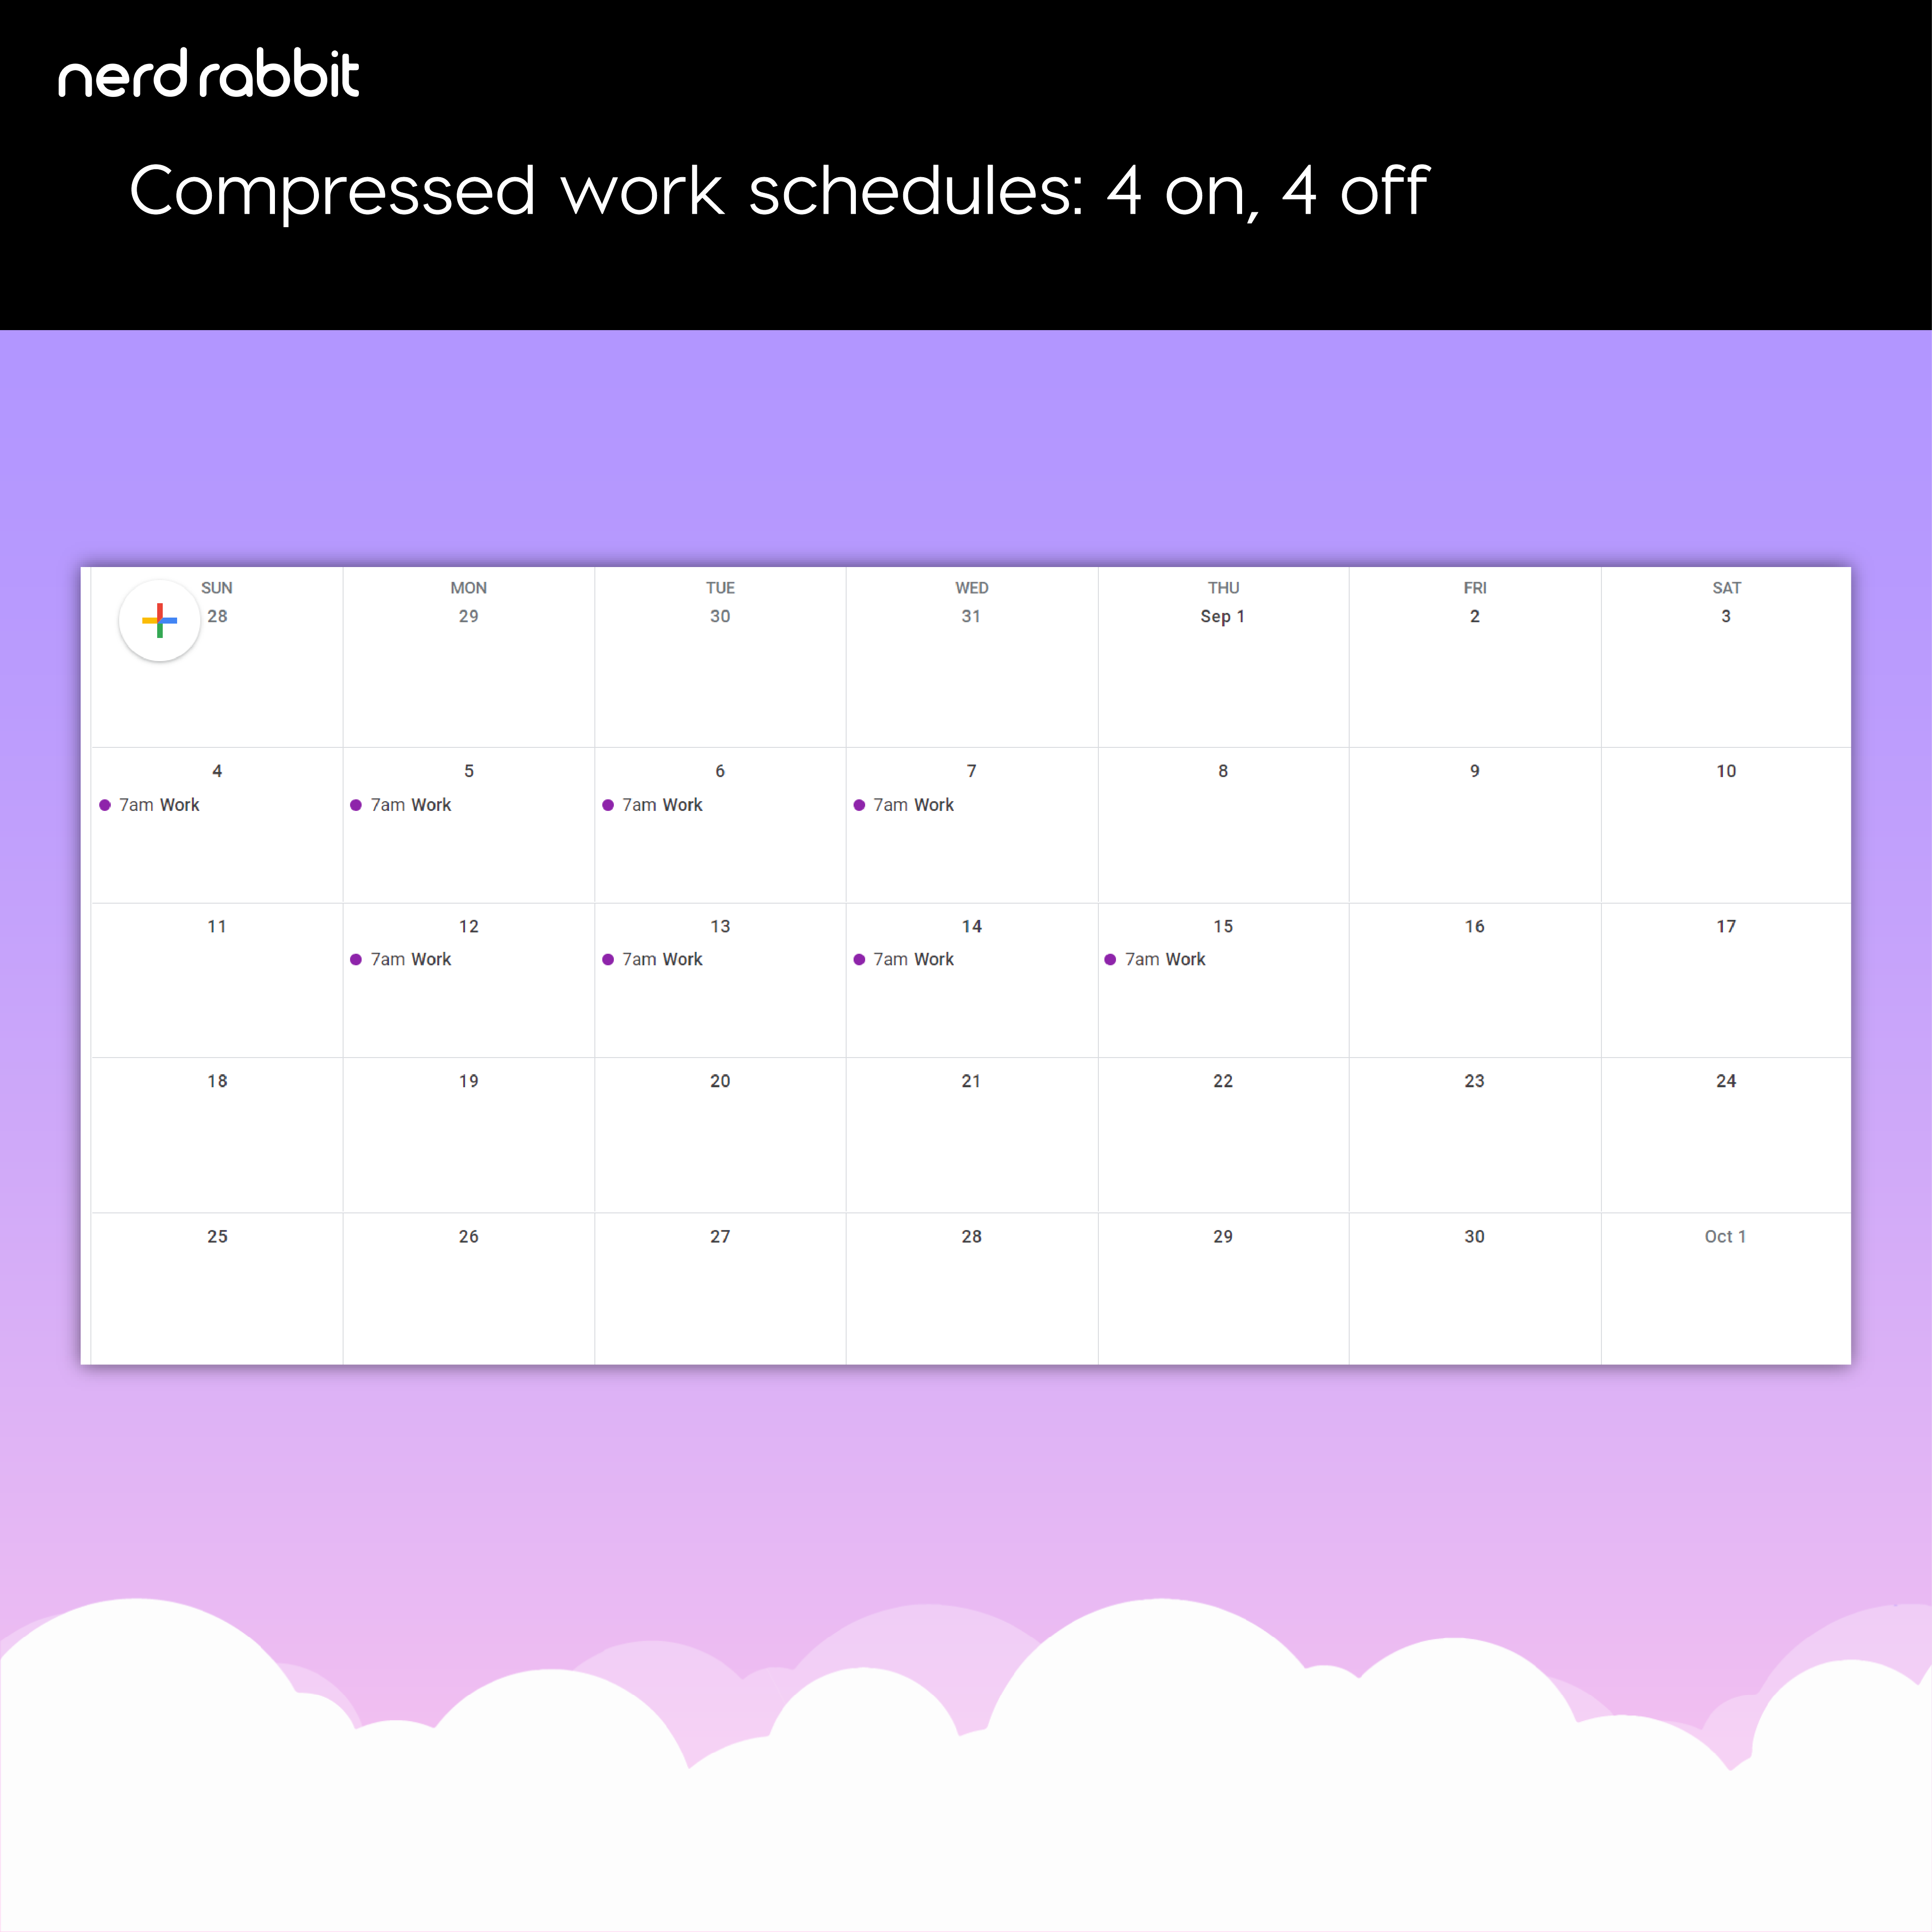 Picture of a 4 on, 4 off compressed work schedule.